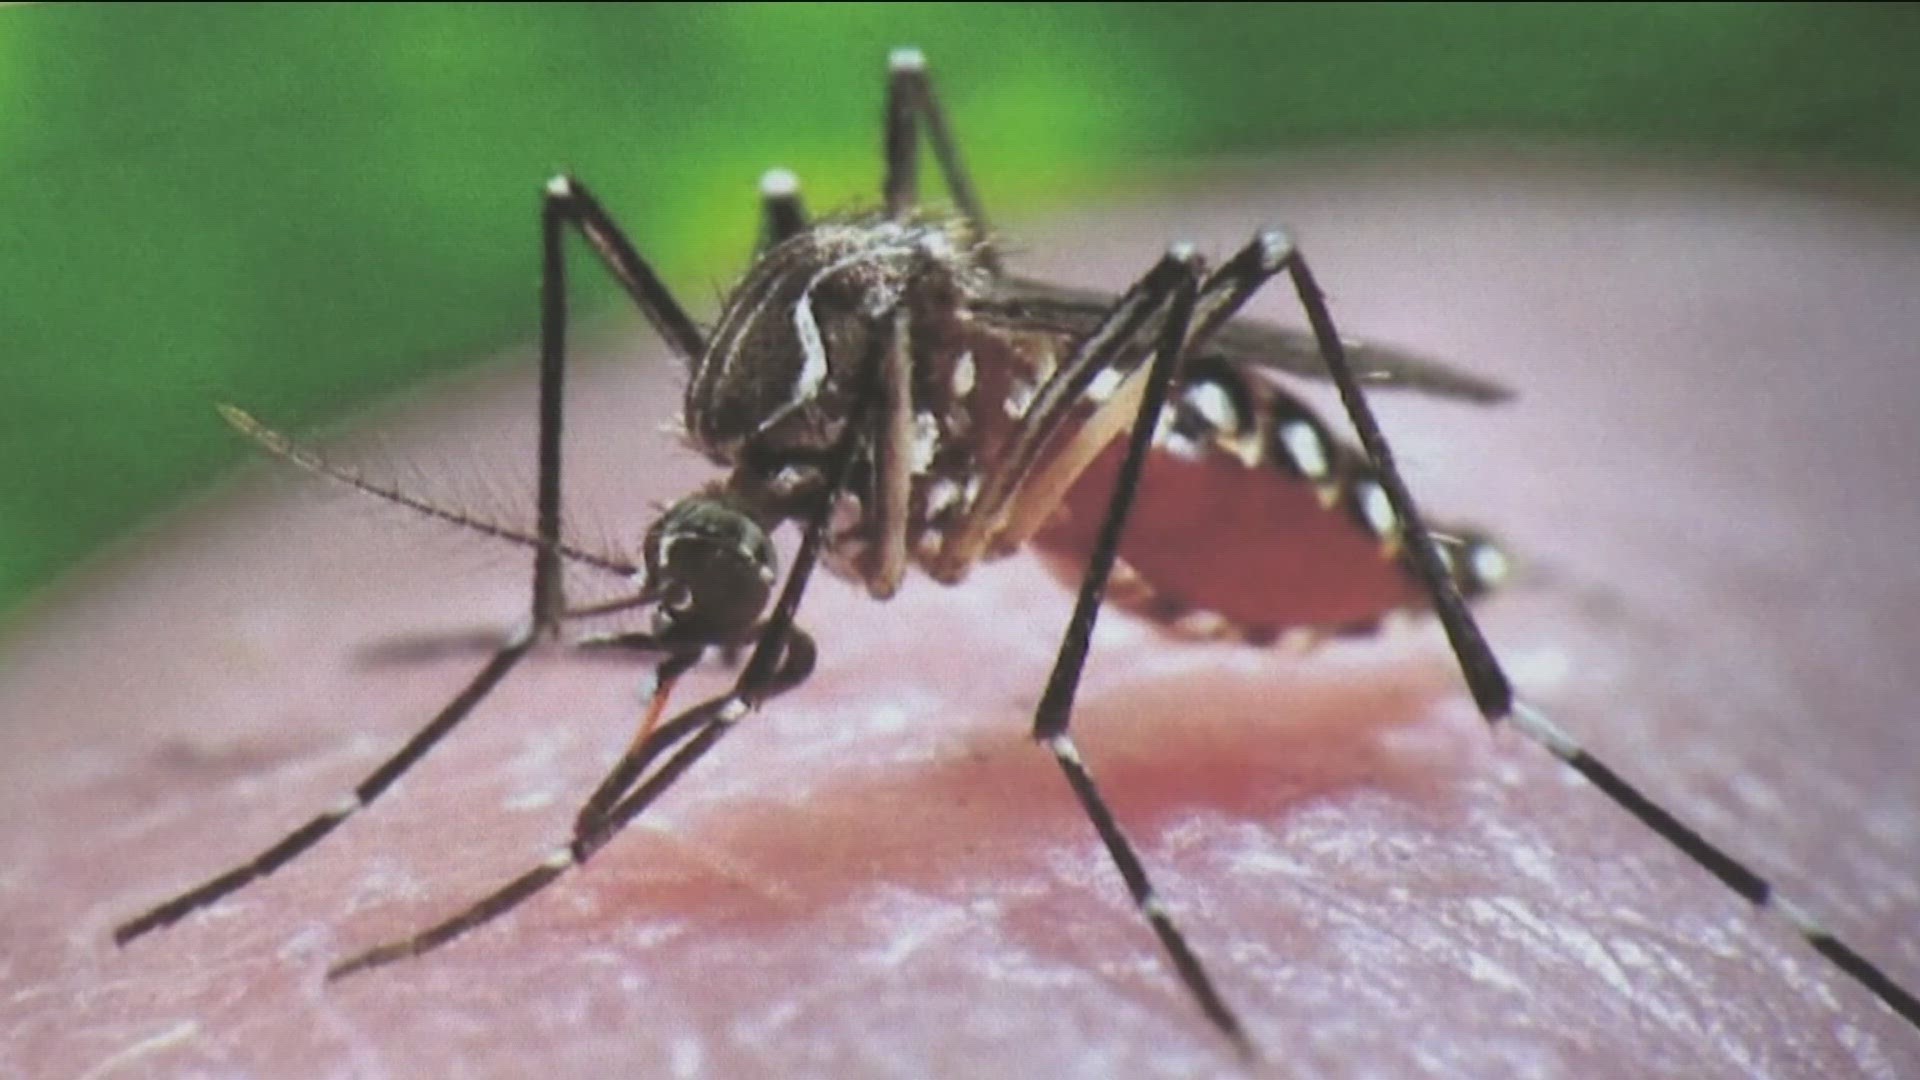 The Aedes mosquitos can transmit diseases like Dengue, Yellow Fever, Zika and Chikungunya.